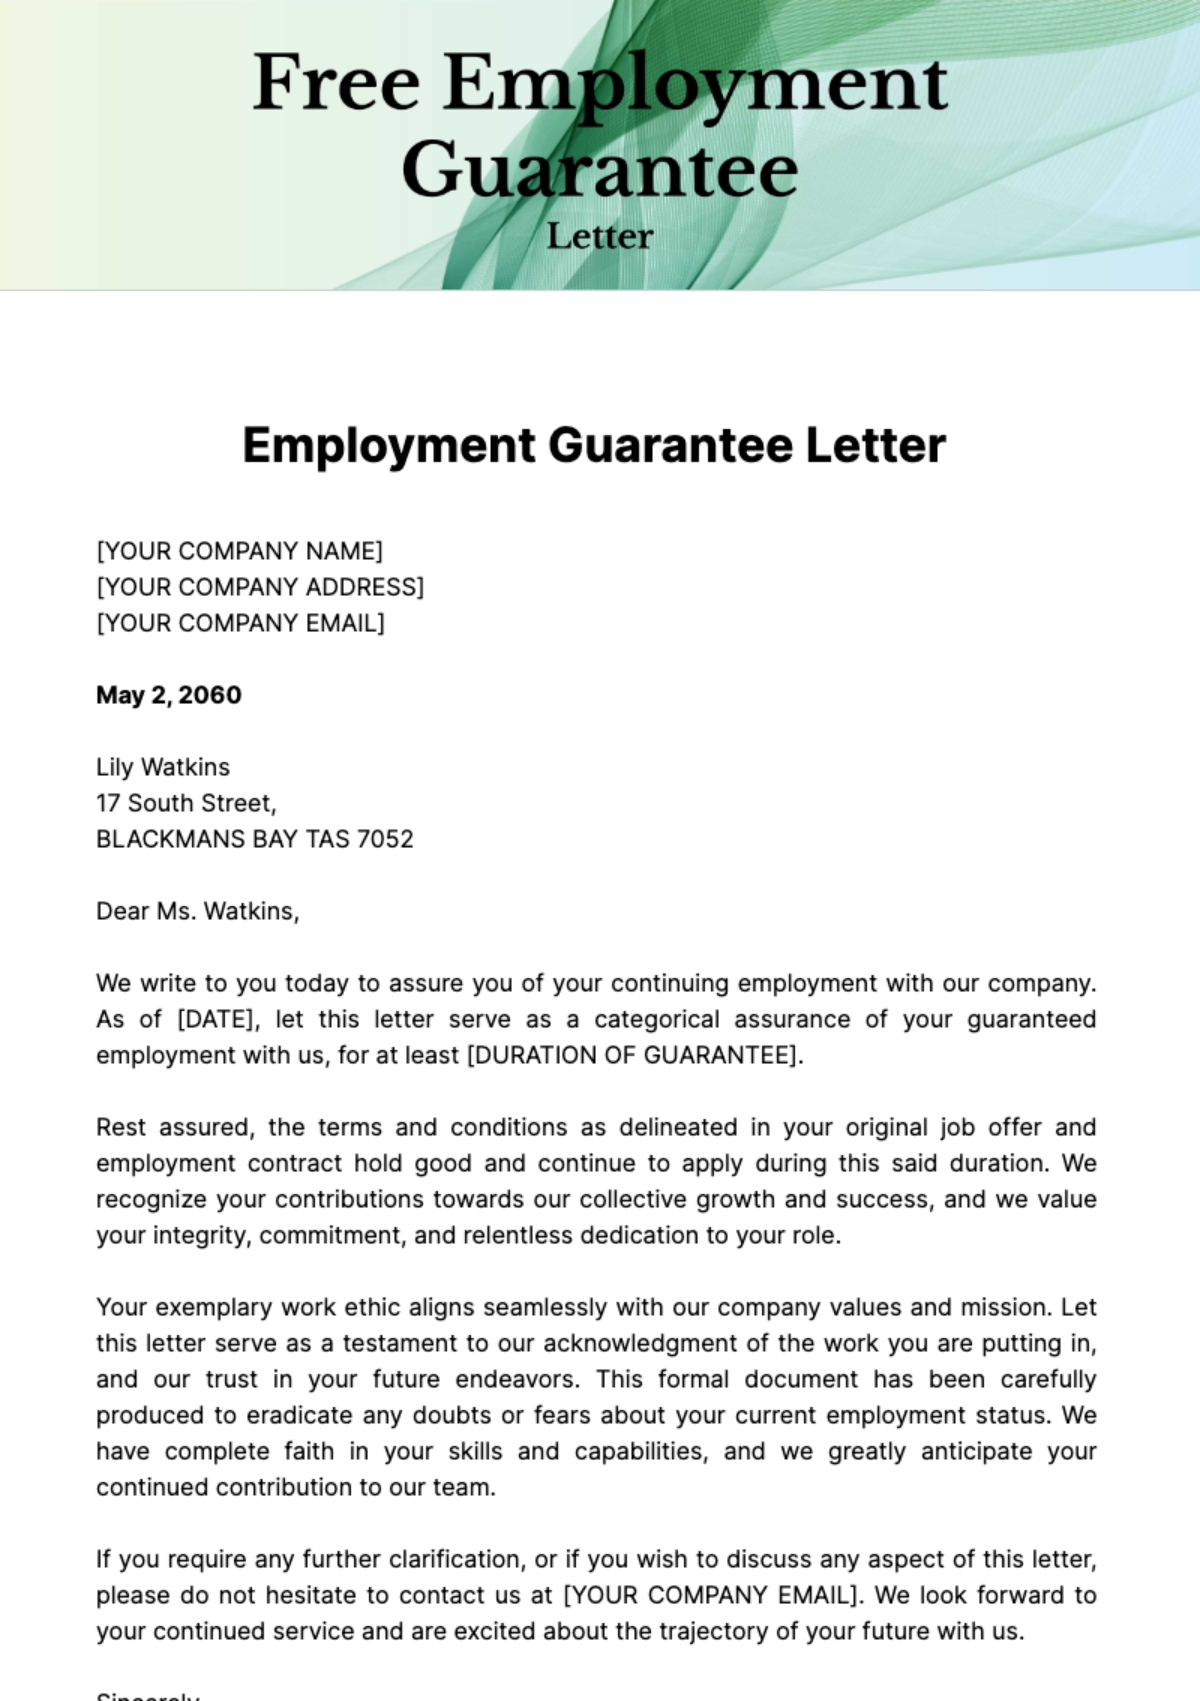 Free Employment Guarantee Letter Template